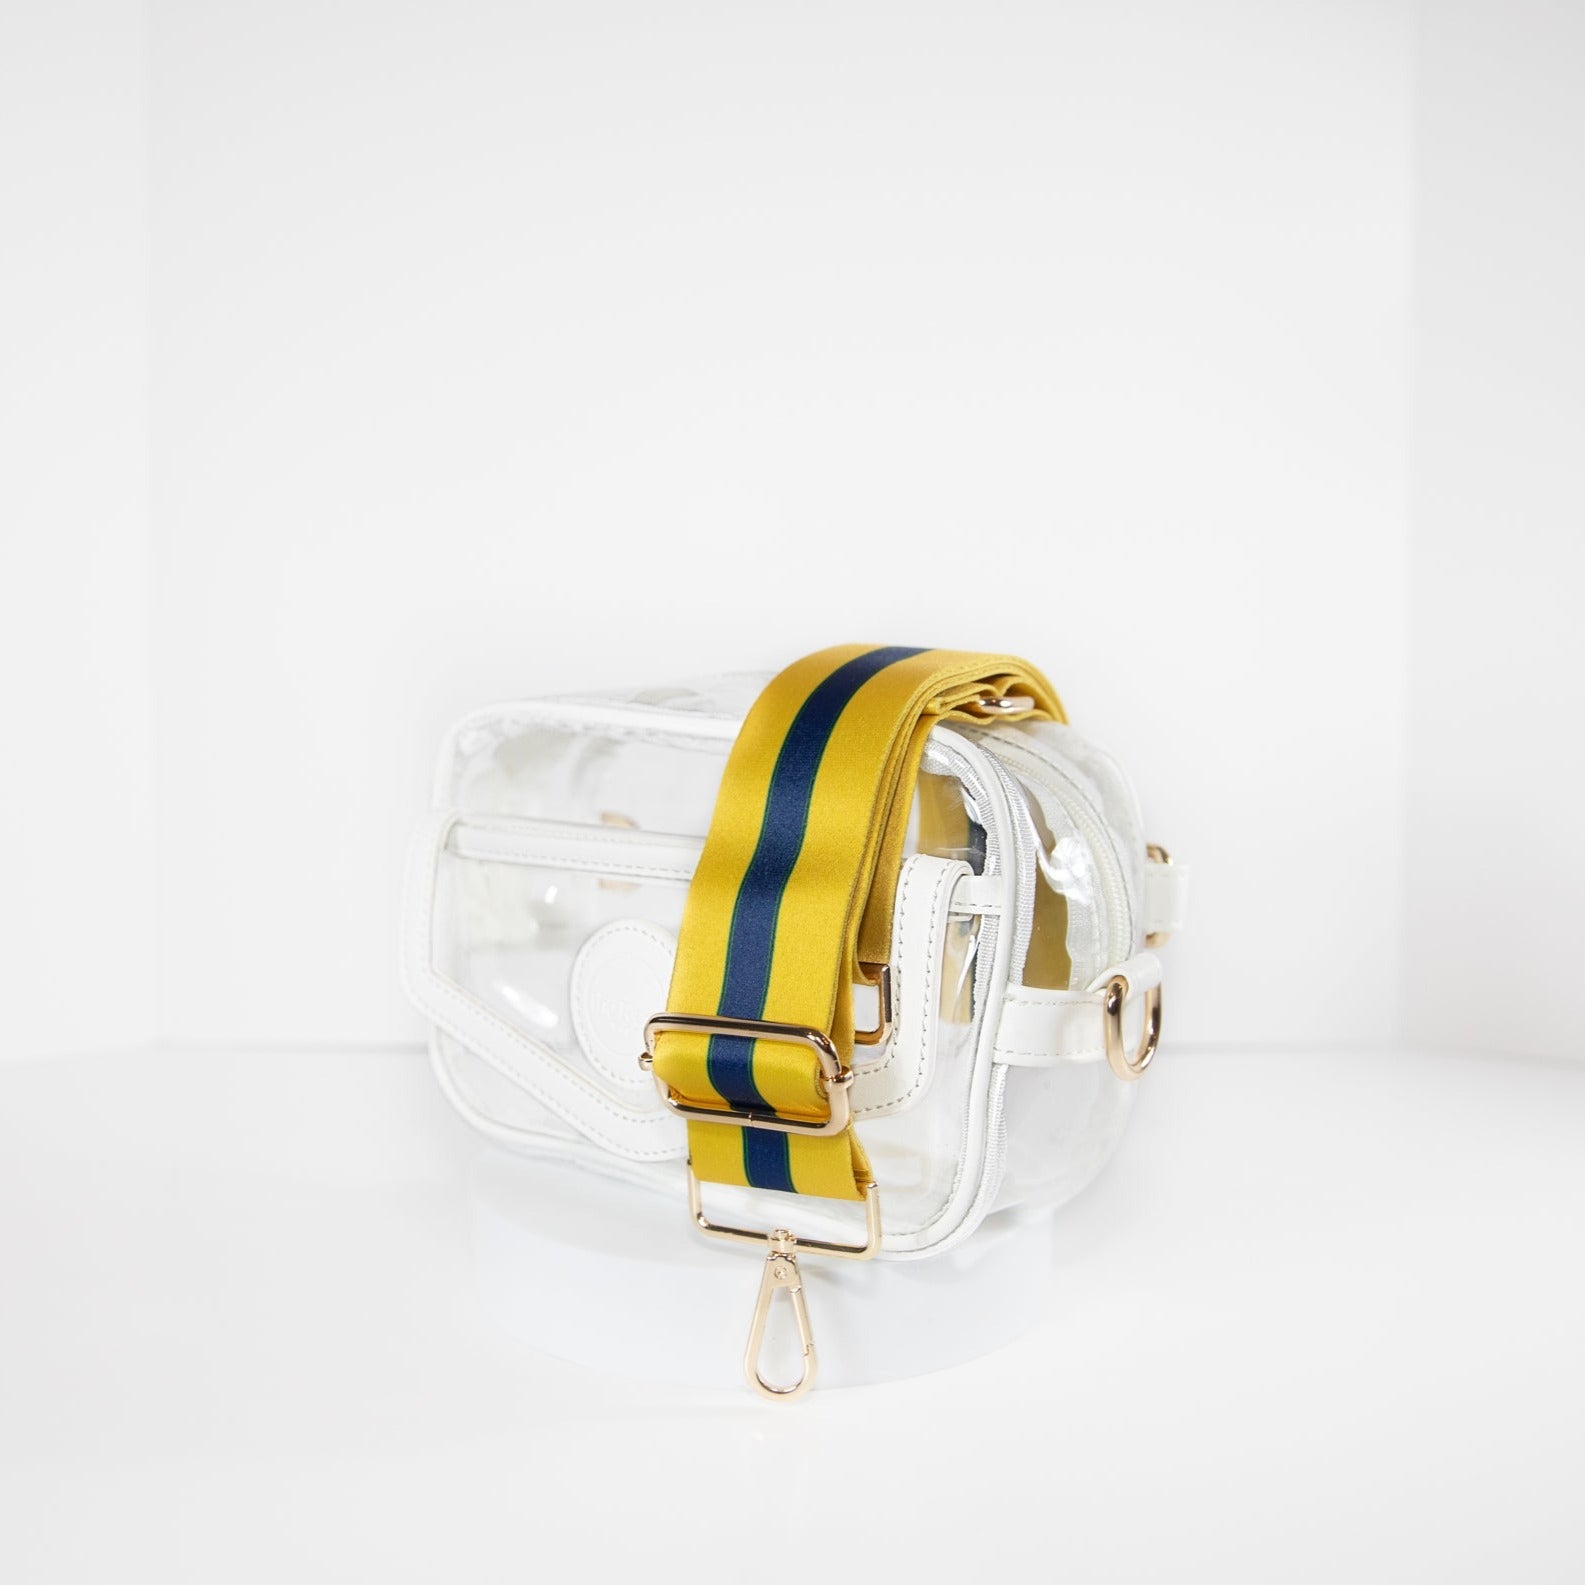 Clear stadium bag in white leather trim, side facing, with a crossbody strap in Notre Dame Fighting Irish team colors.